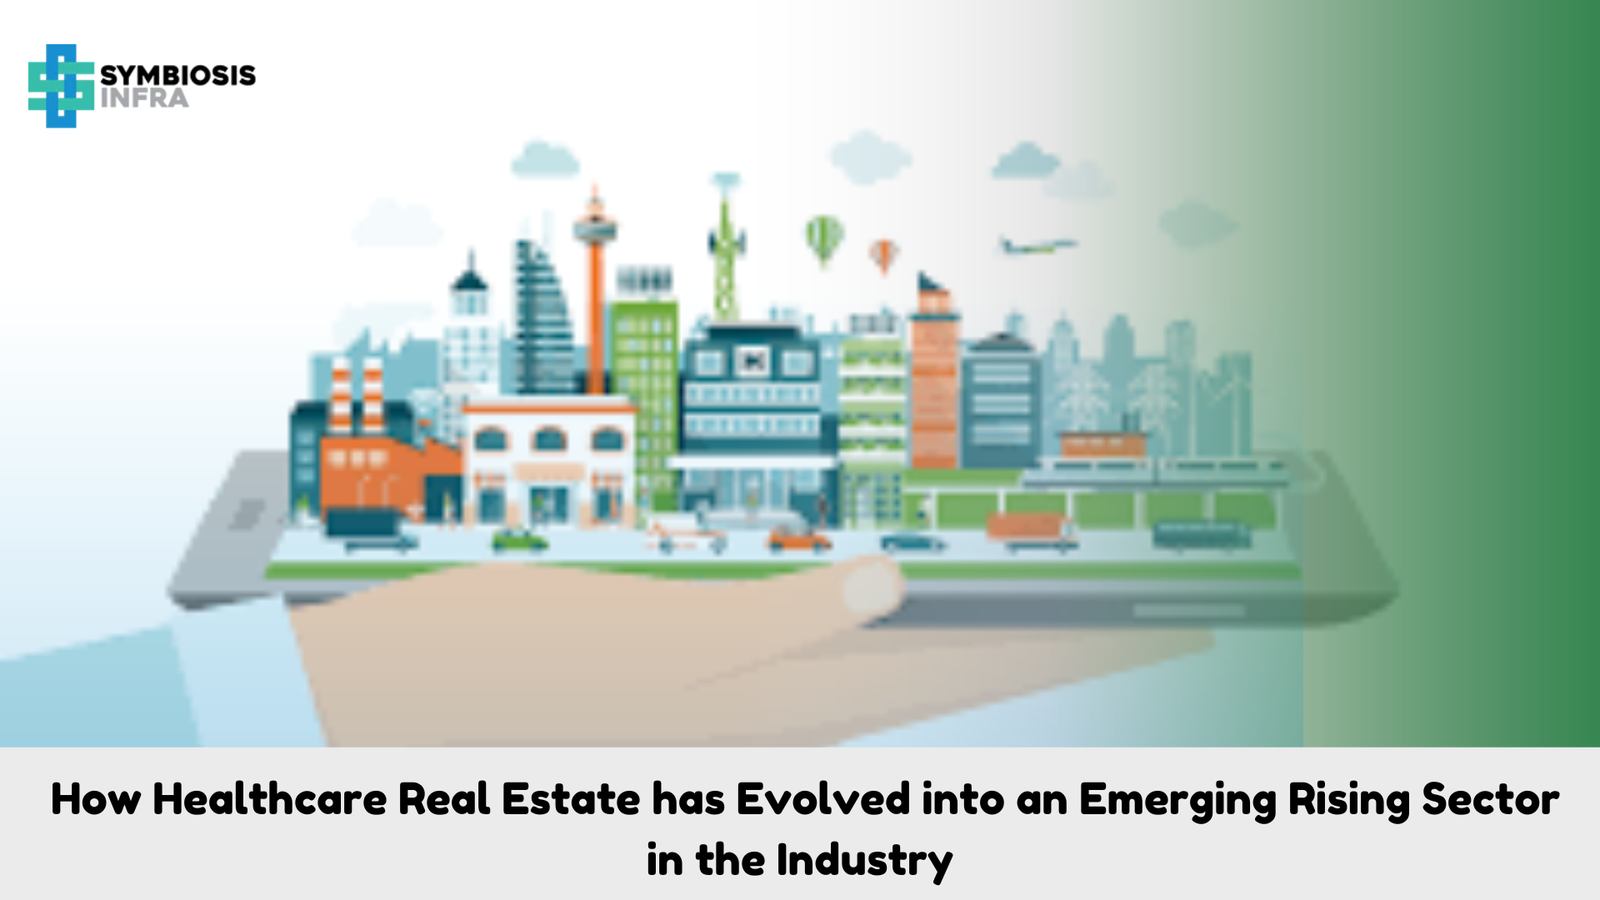 How Healthcare Real Estate has Evolved into an Emerging Rising Sector in the Industry